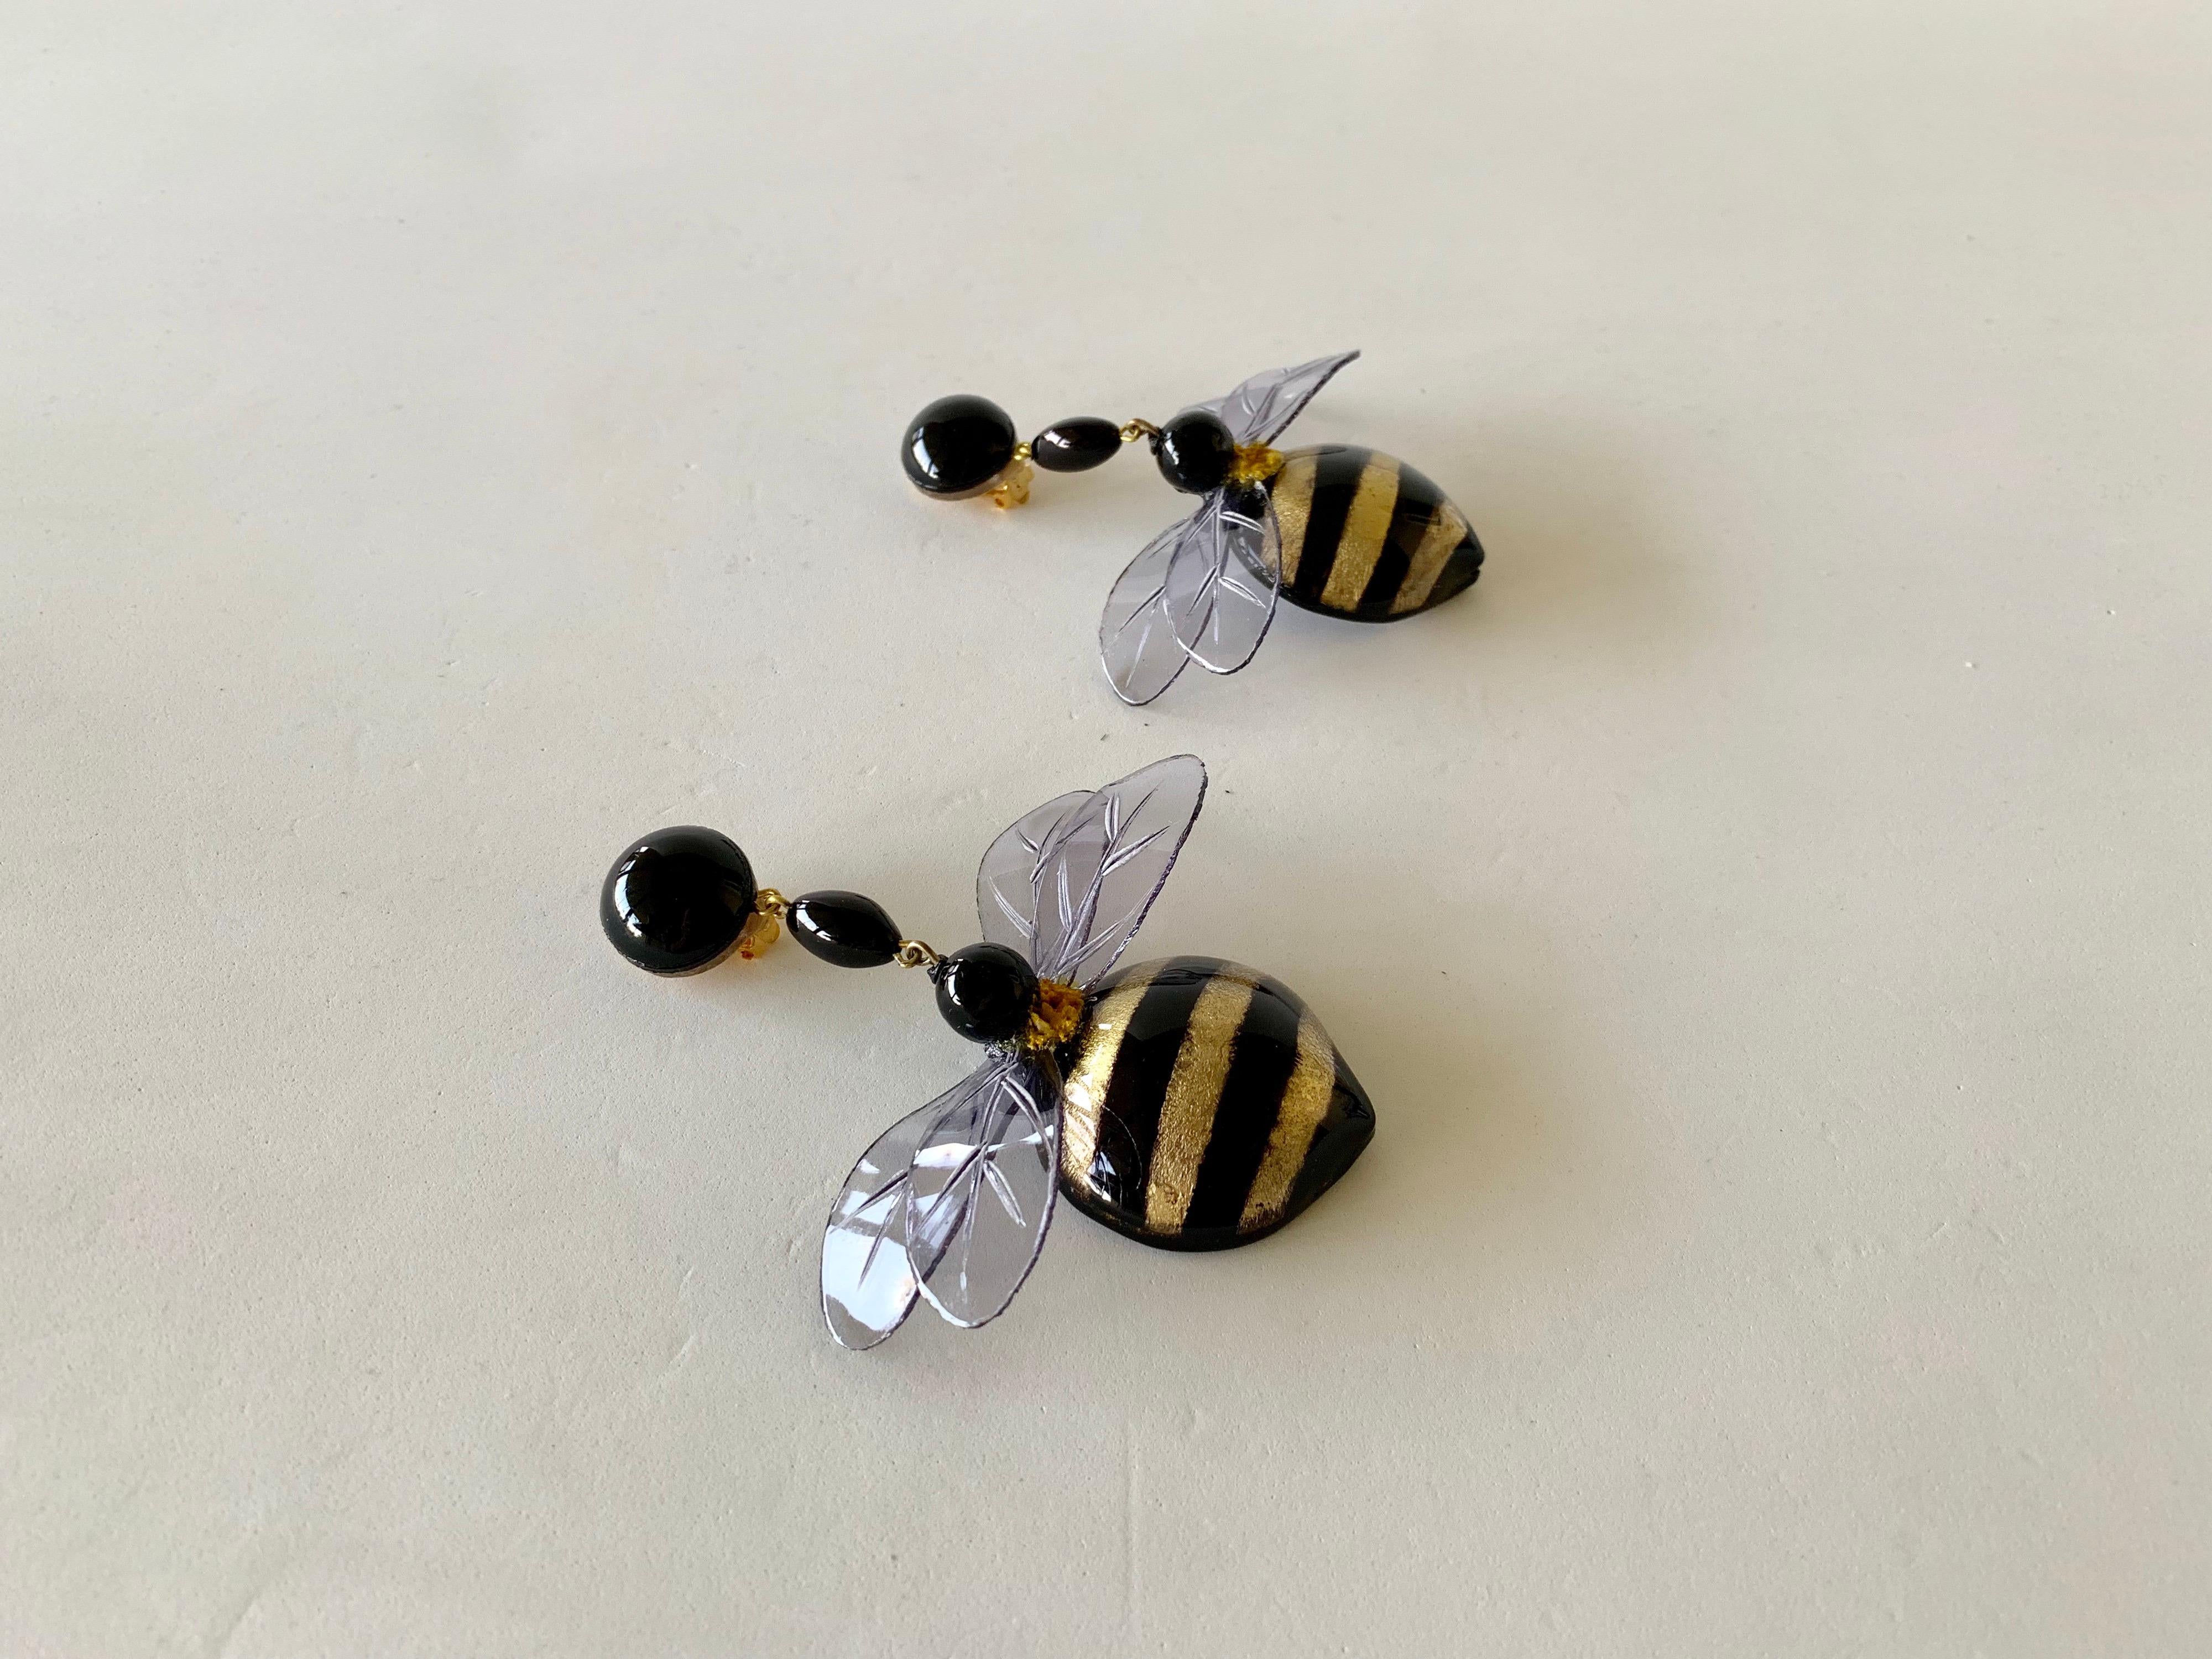  Large Black and Gold Bumblebee Statement Earrings  In Excellent Condition For Sale In Palm Springs, CA